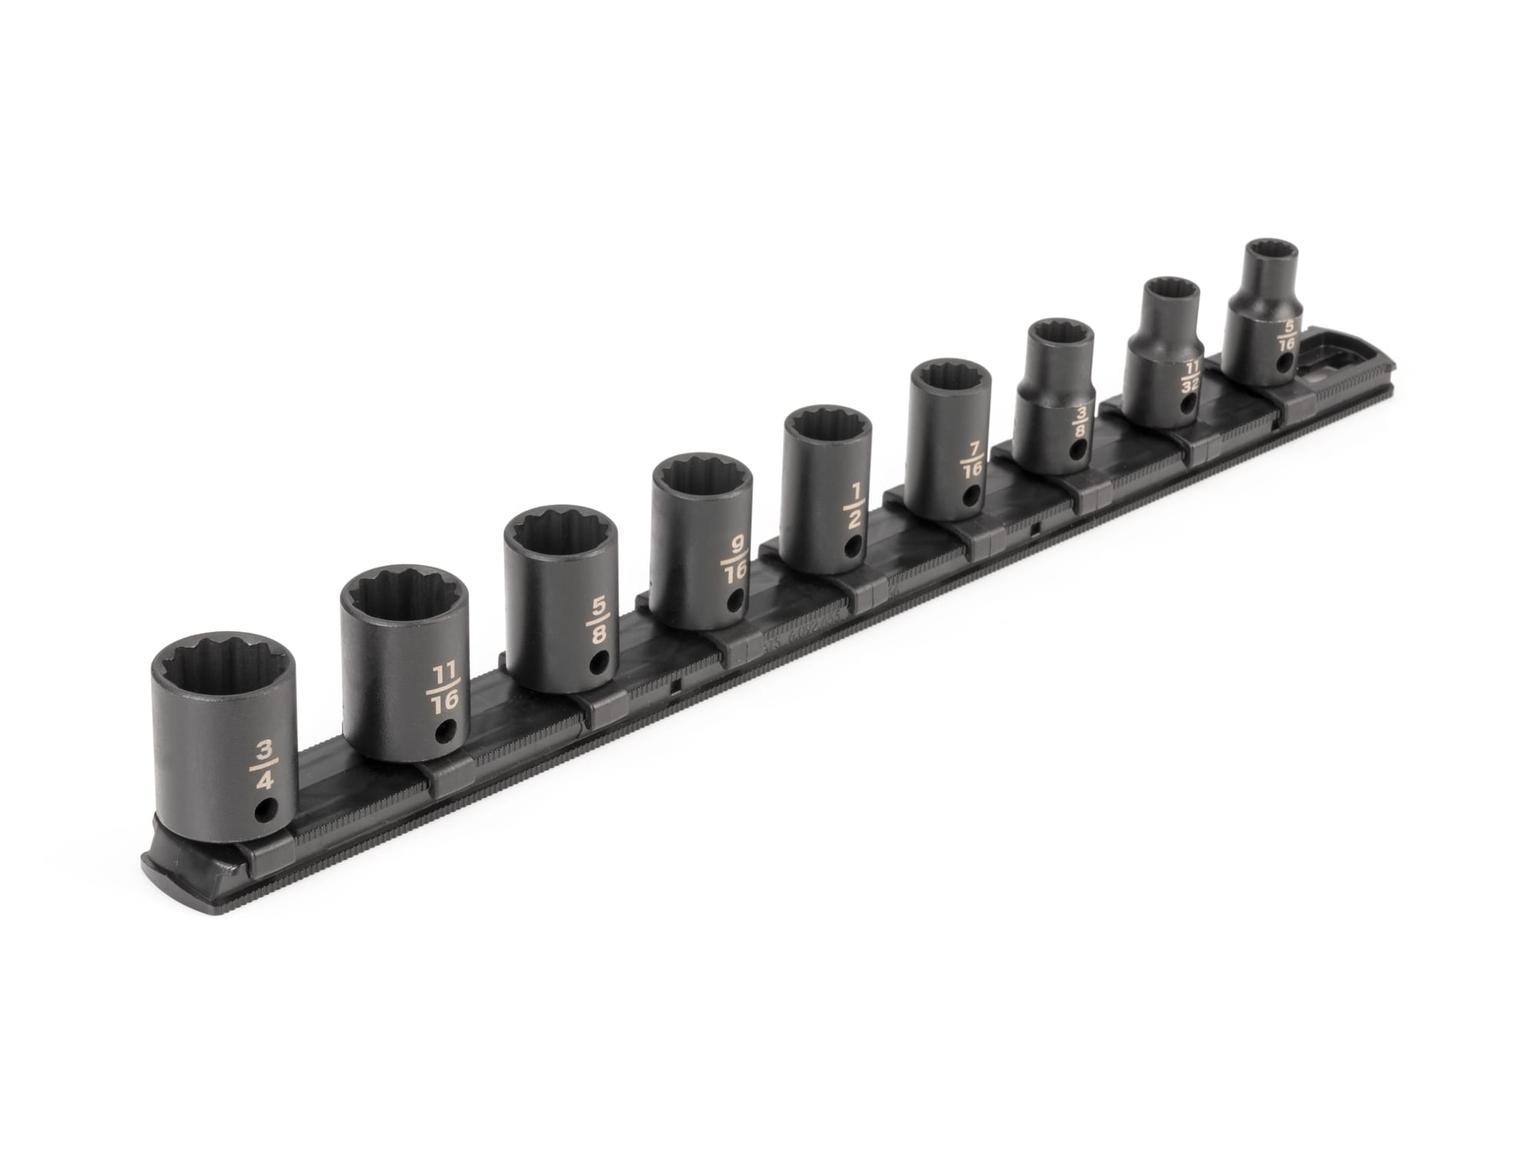 TEKTON SID91108-T 3/8 Inch Drive 12-Point Impact Socket Set with Rail, 9-Piece (5/16-3/4 in.)